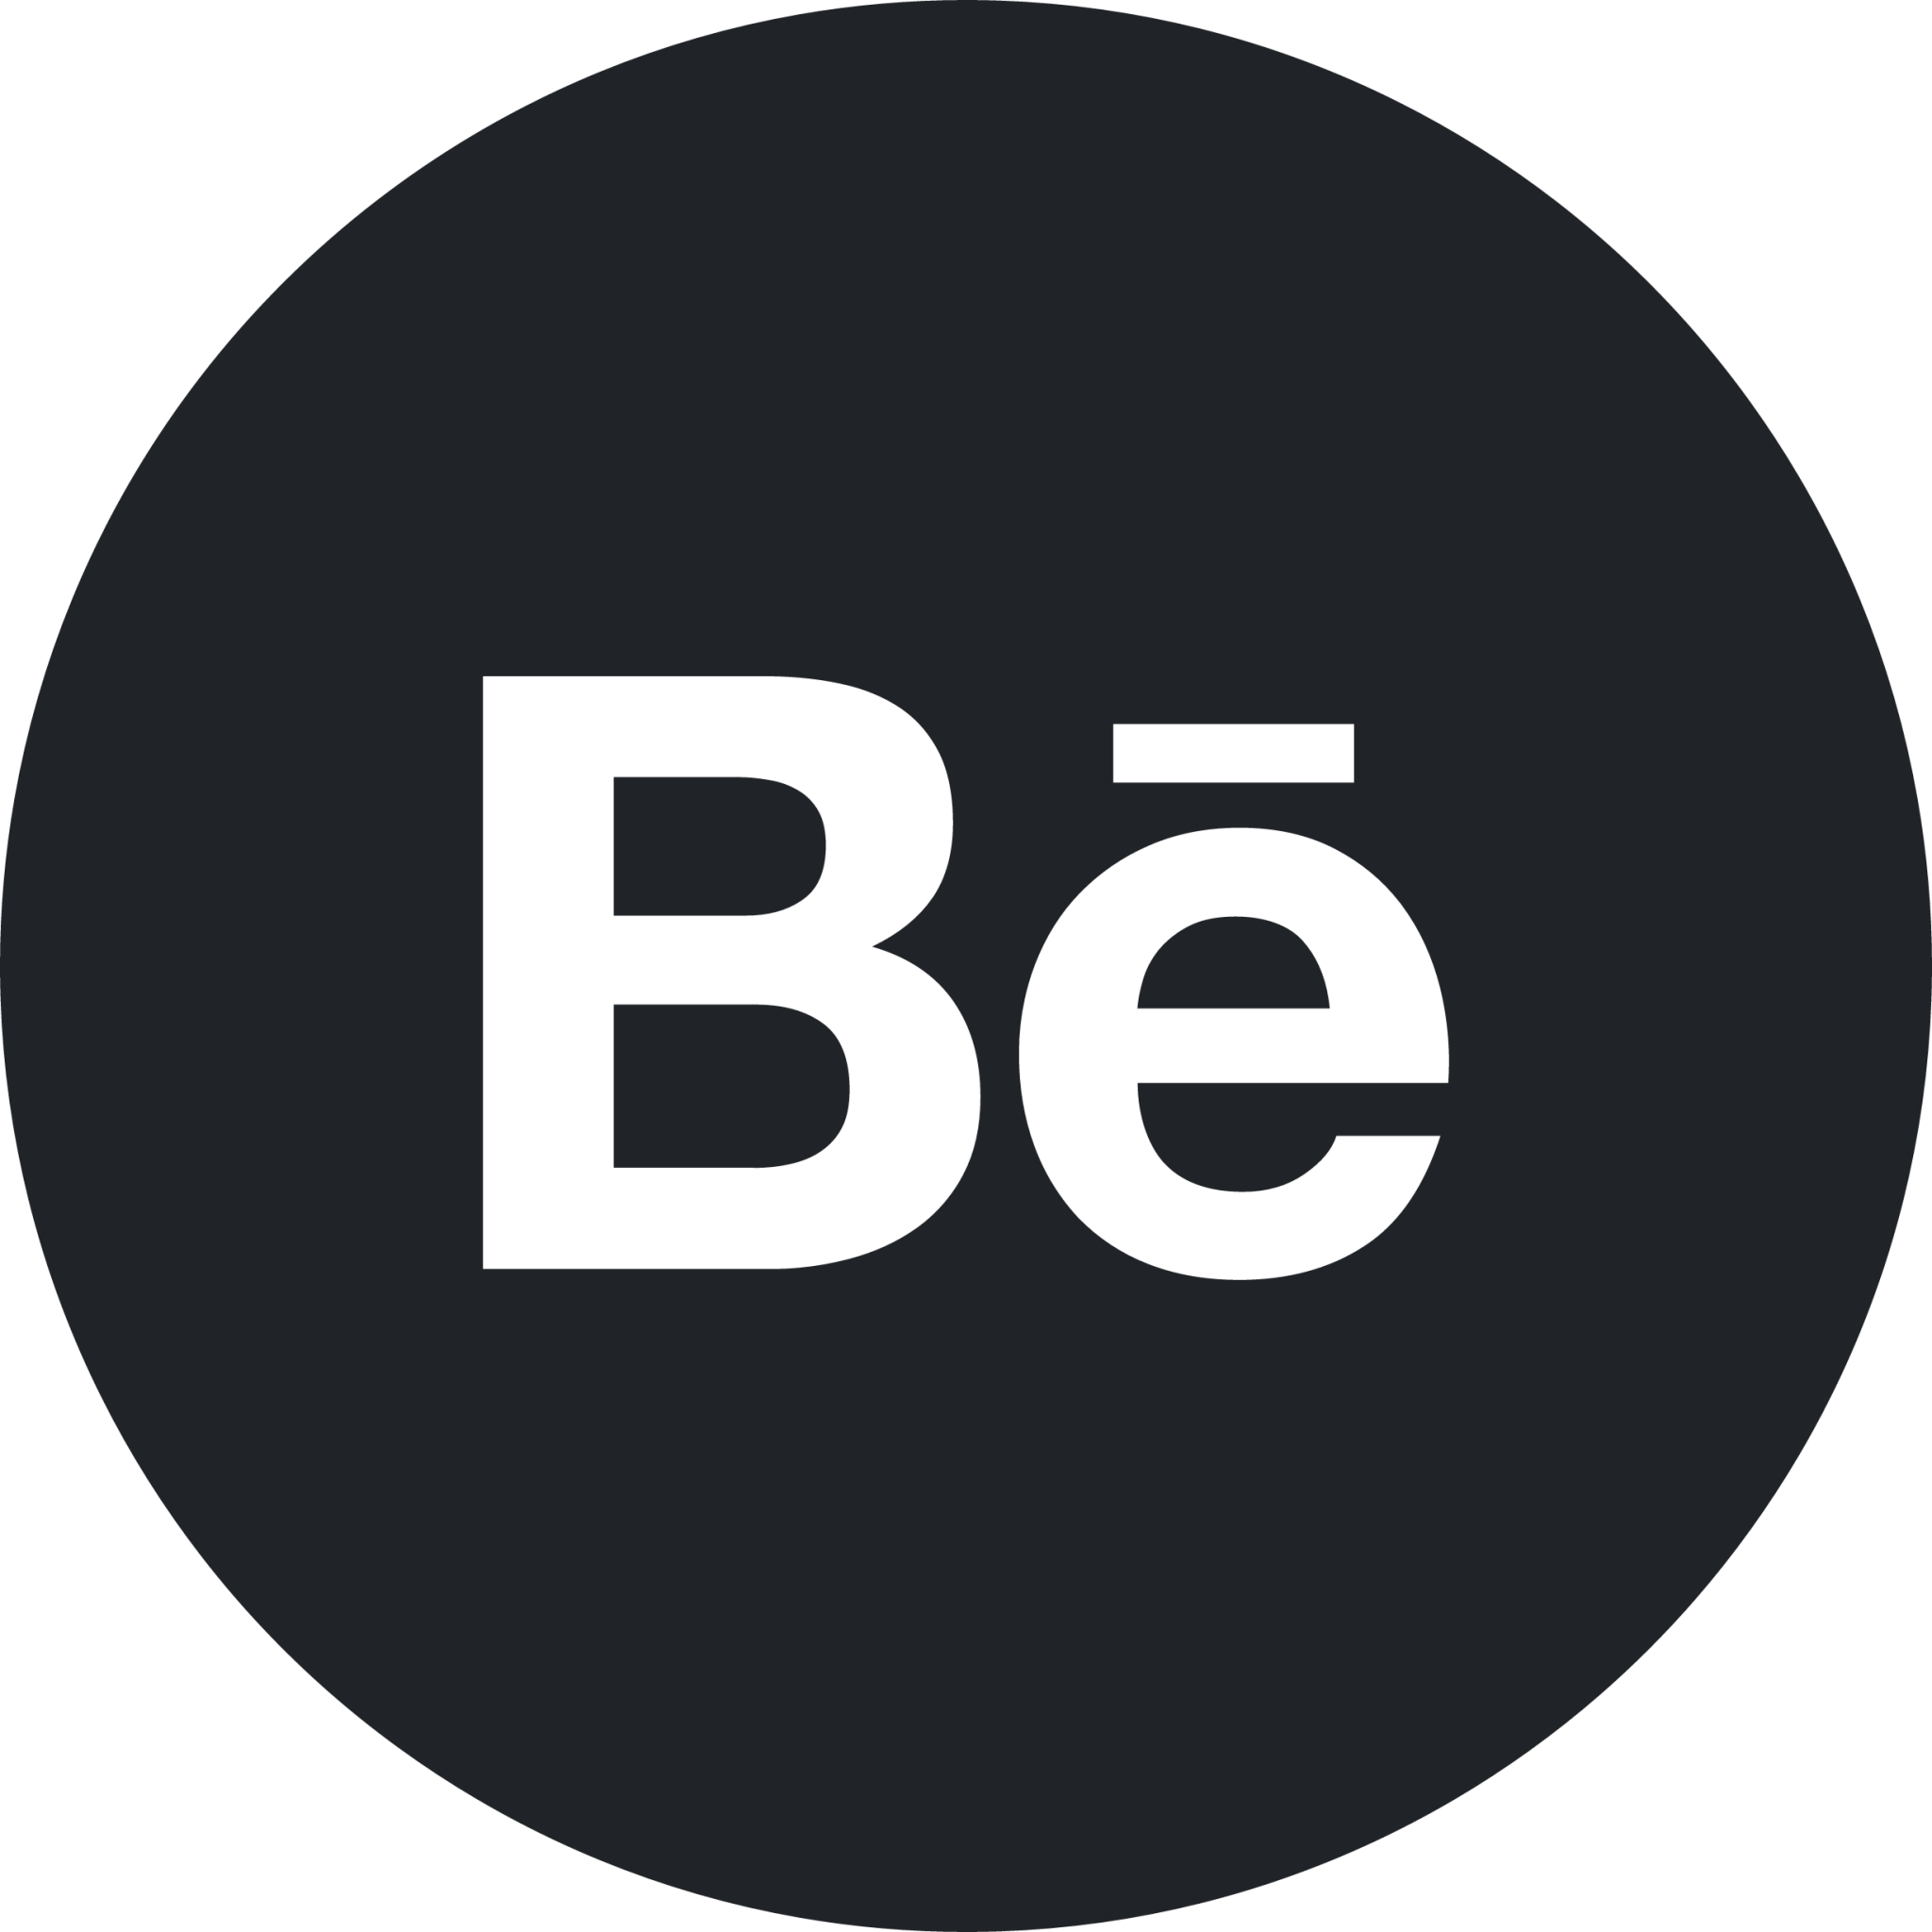 behance (rounded filled) icon